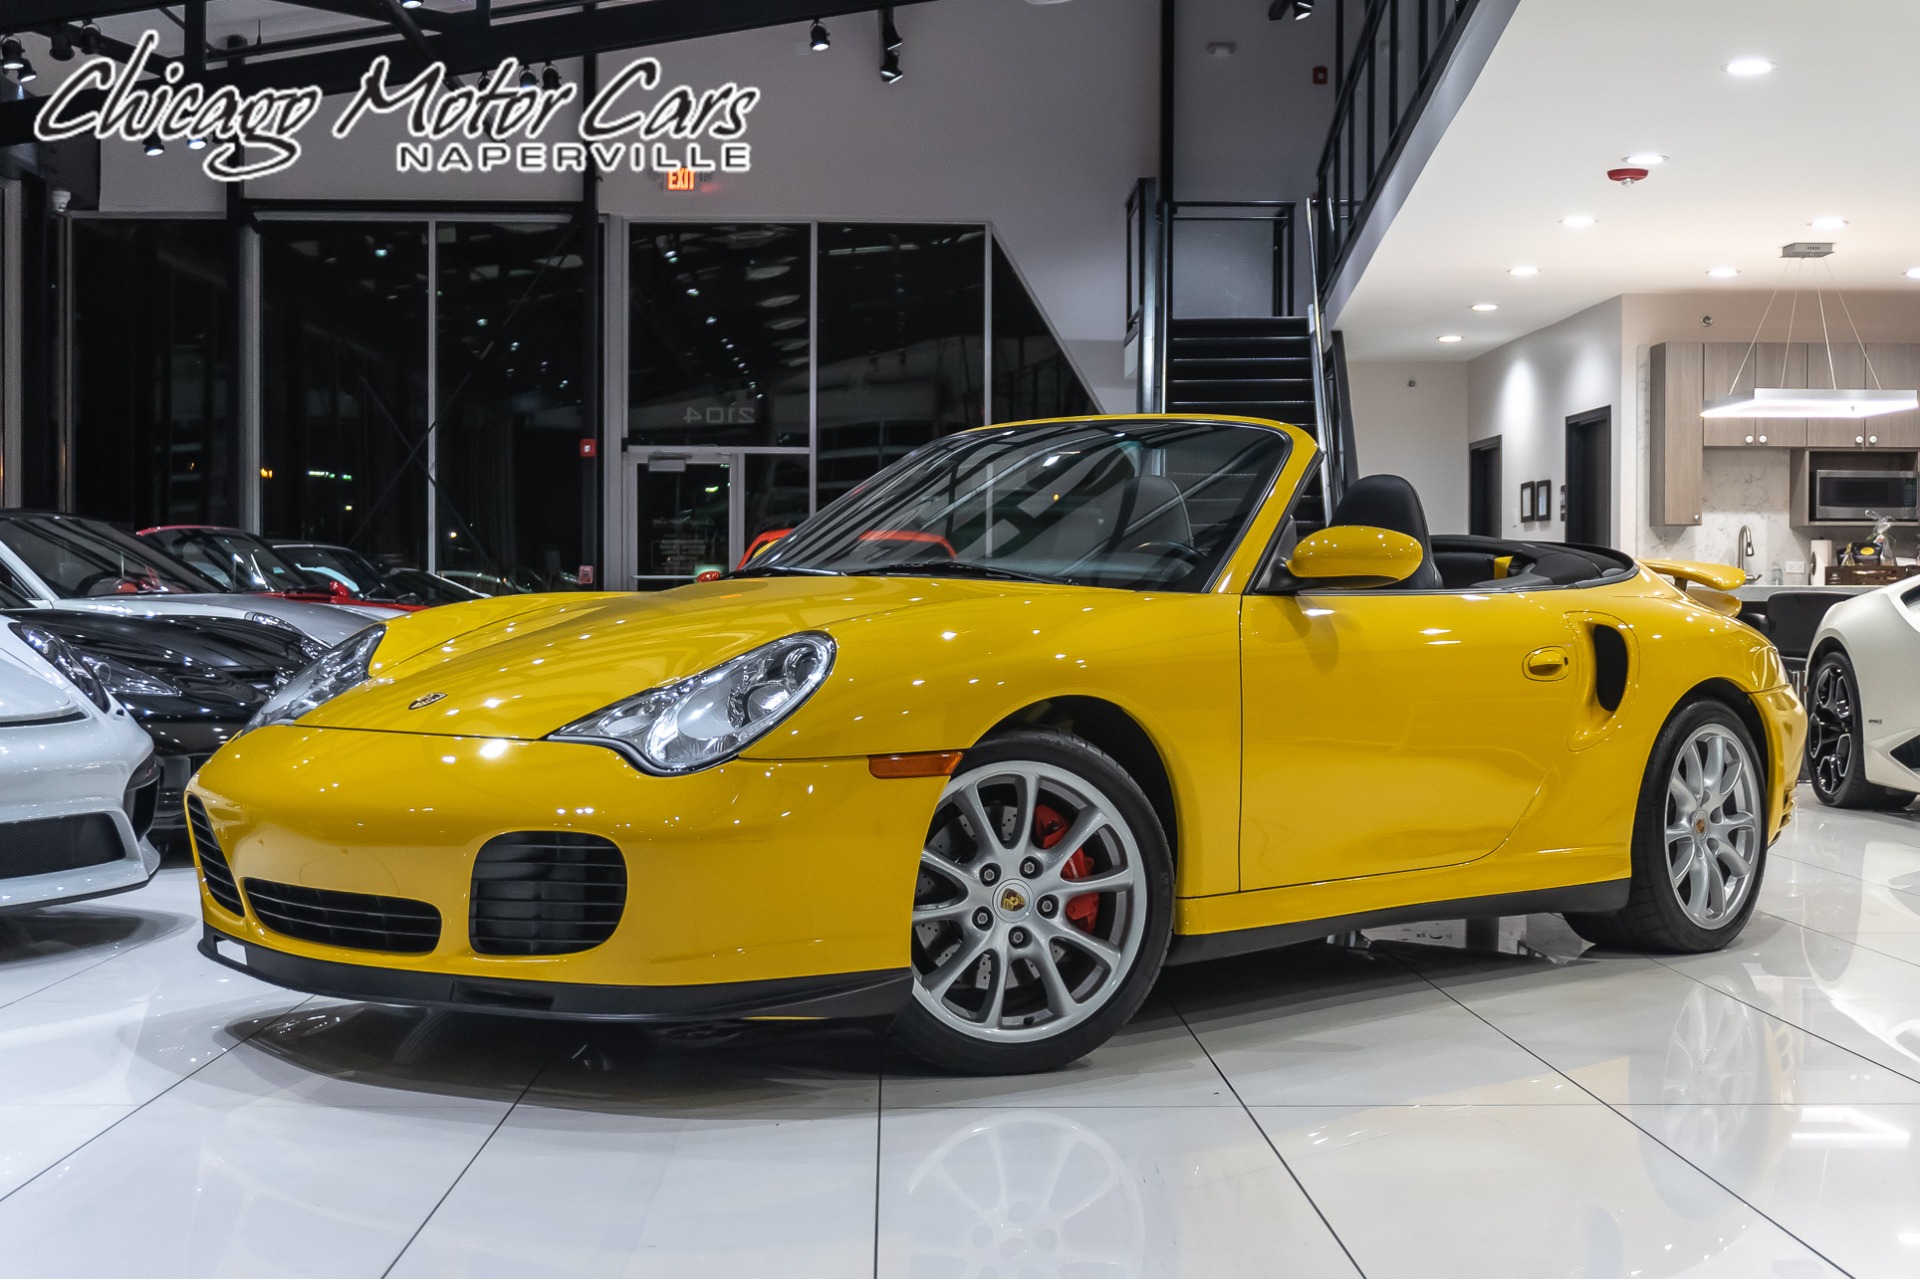 Used-2004-Porsche-911-Turbo-Cabriolet-6-Speed-MSRP-136205-CUSTOM-TAILORED